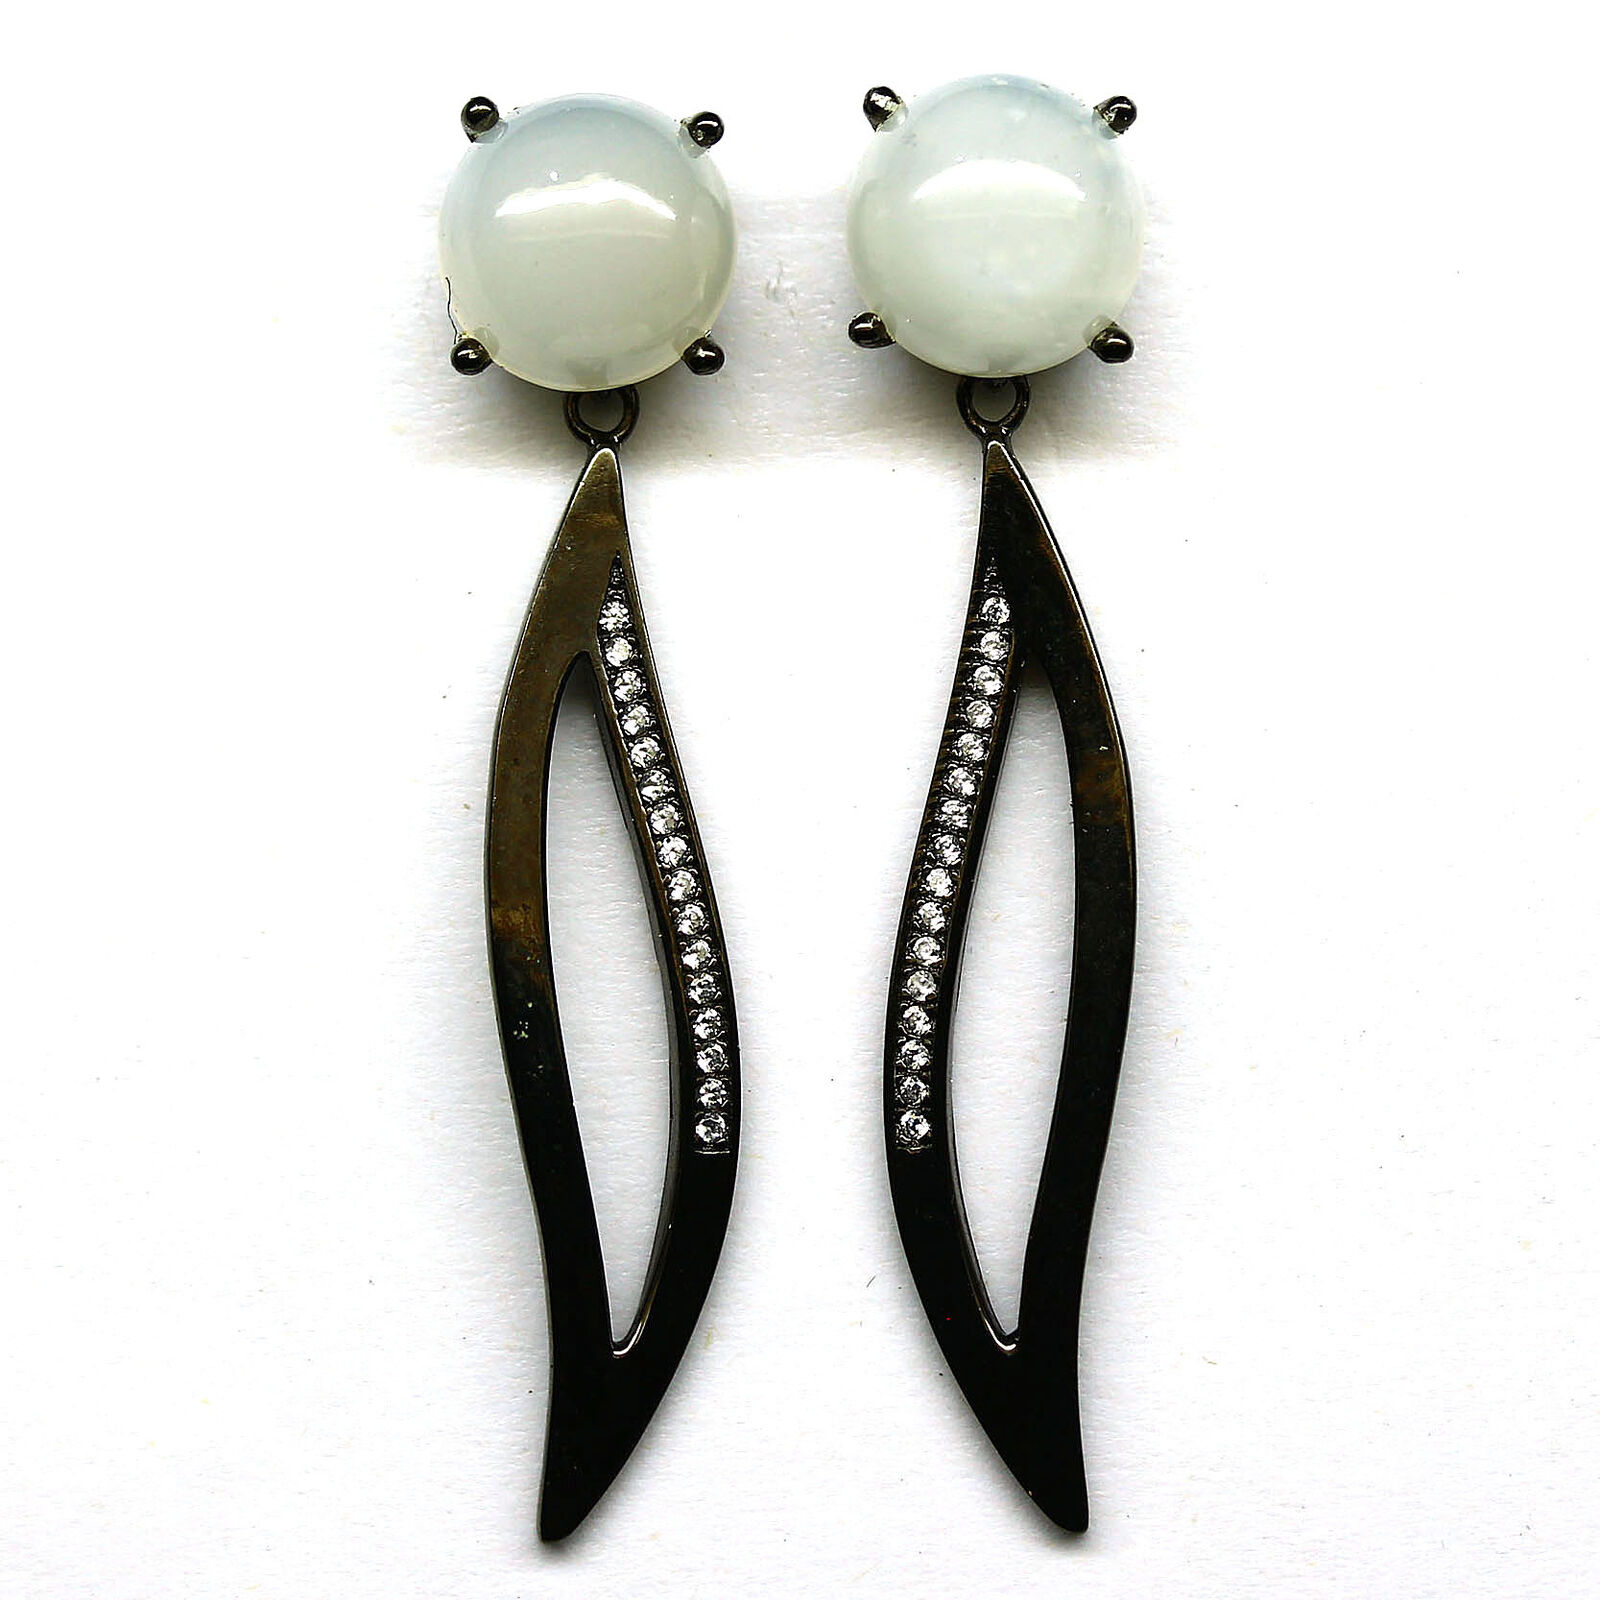 A pair of 925 silver drop earrings set with cabochon cut moonstones and white stones, L. 5cm.